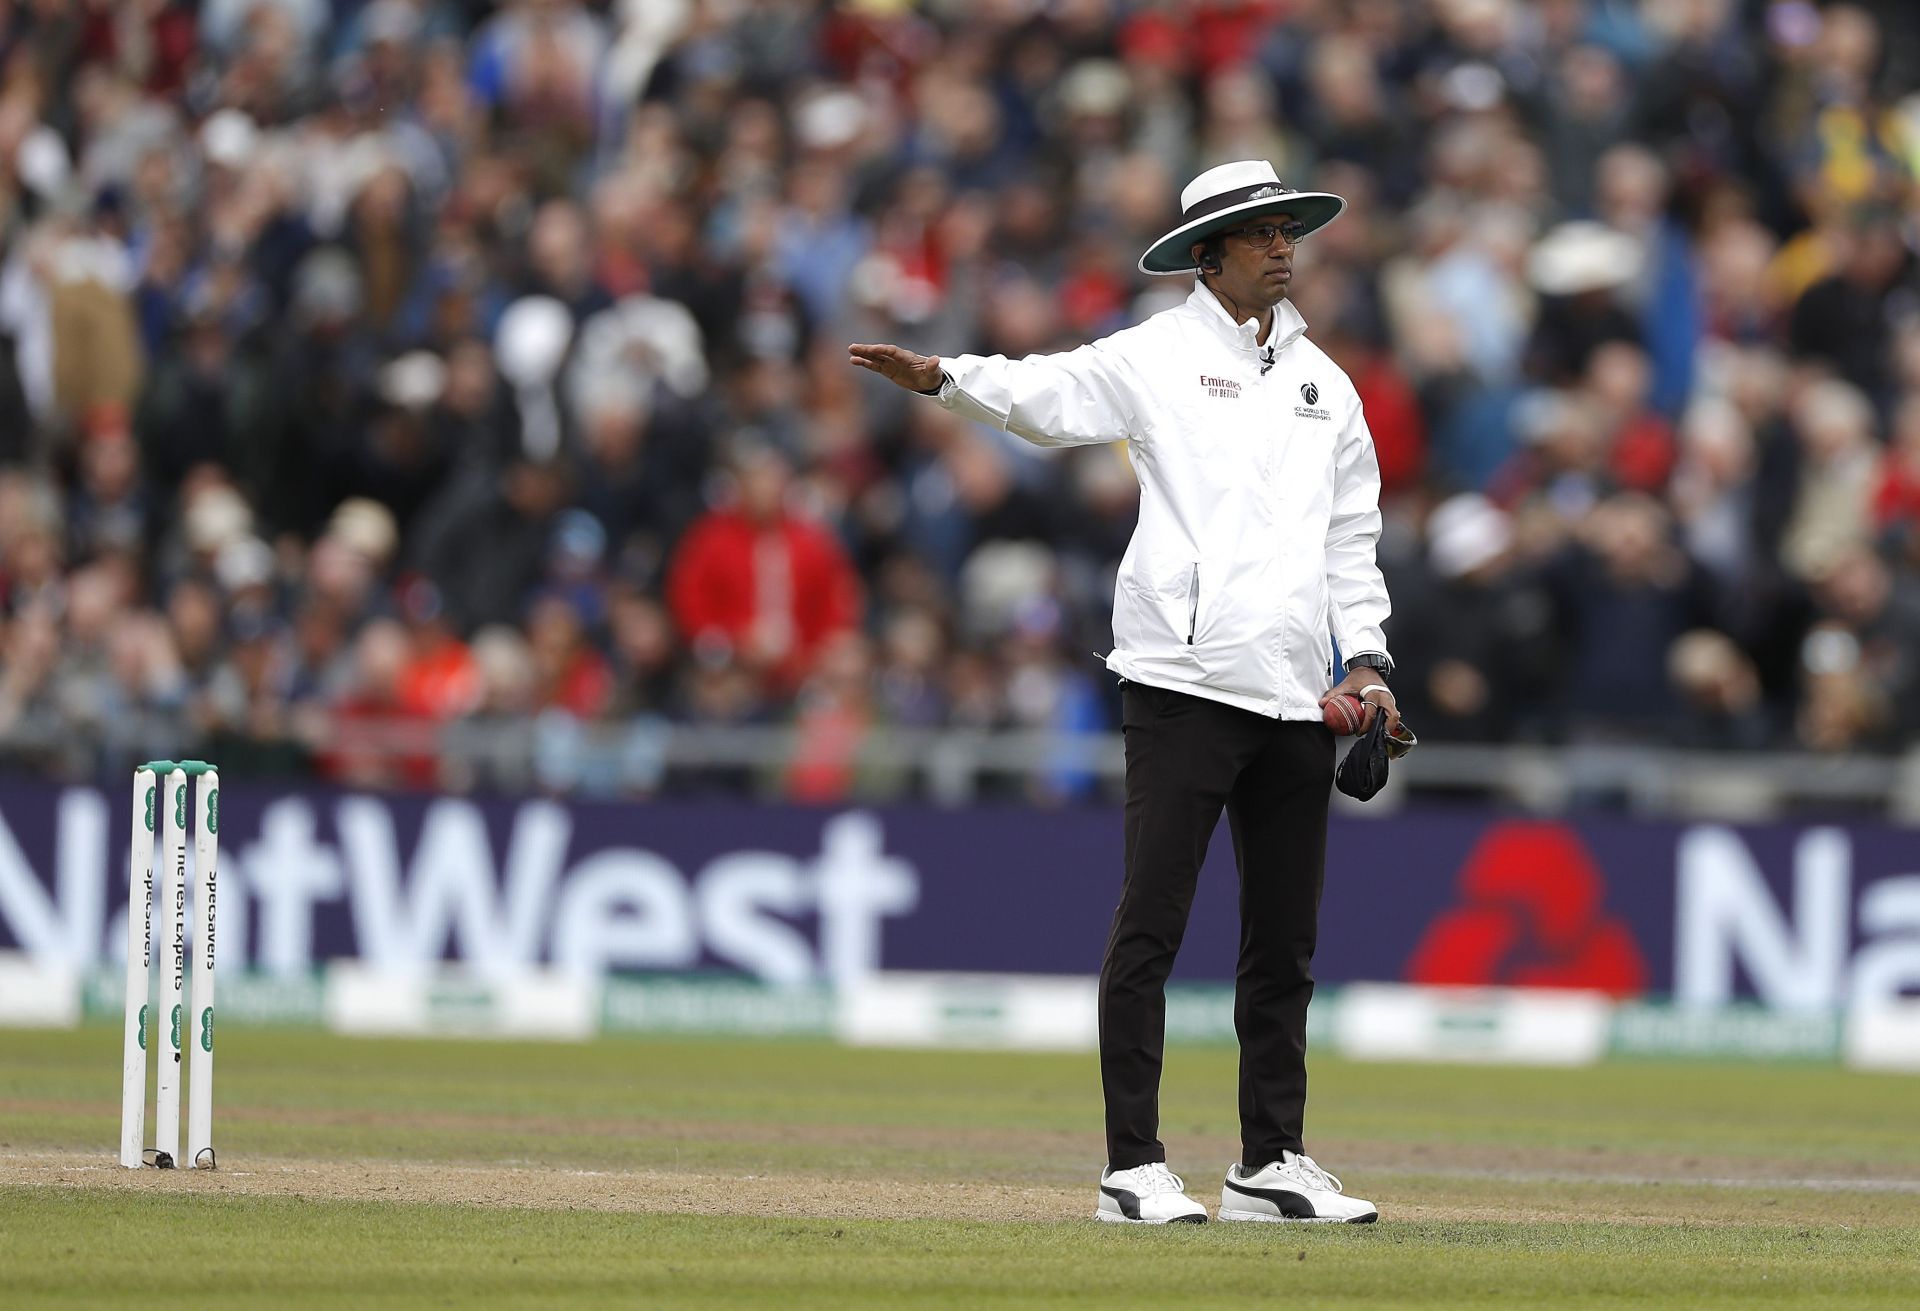 Kumar Dharmasena is set to officiate the T20 World Cup semi-final between England and New Zealand